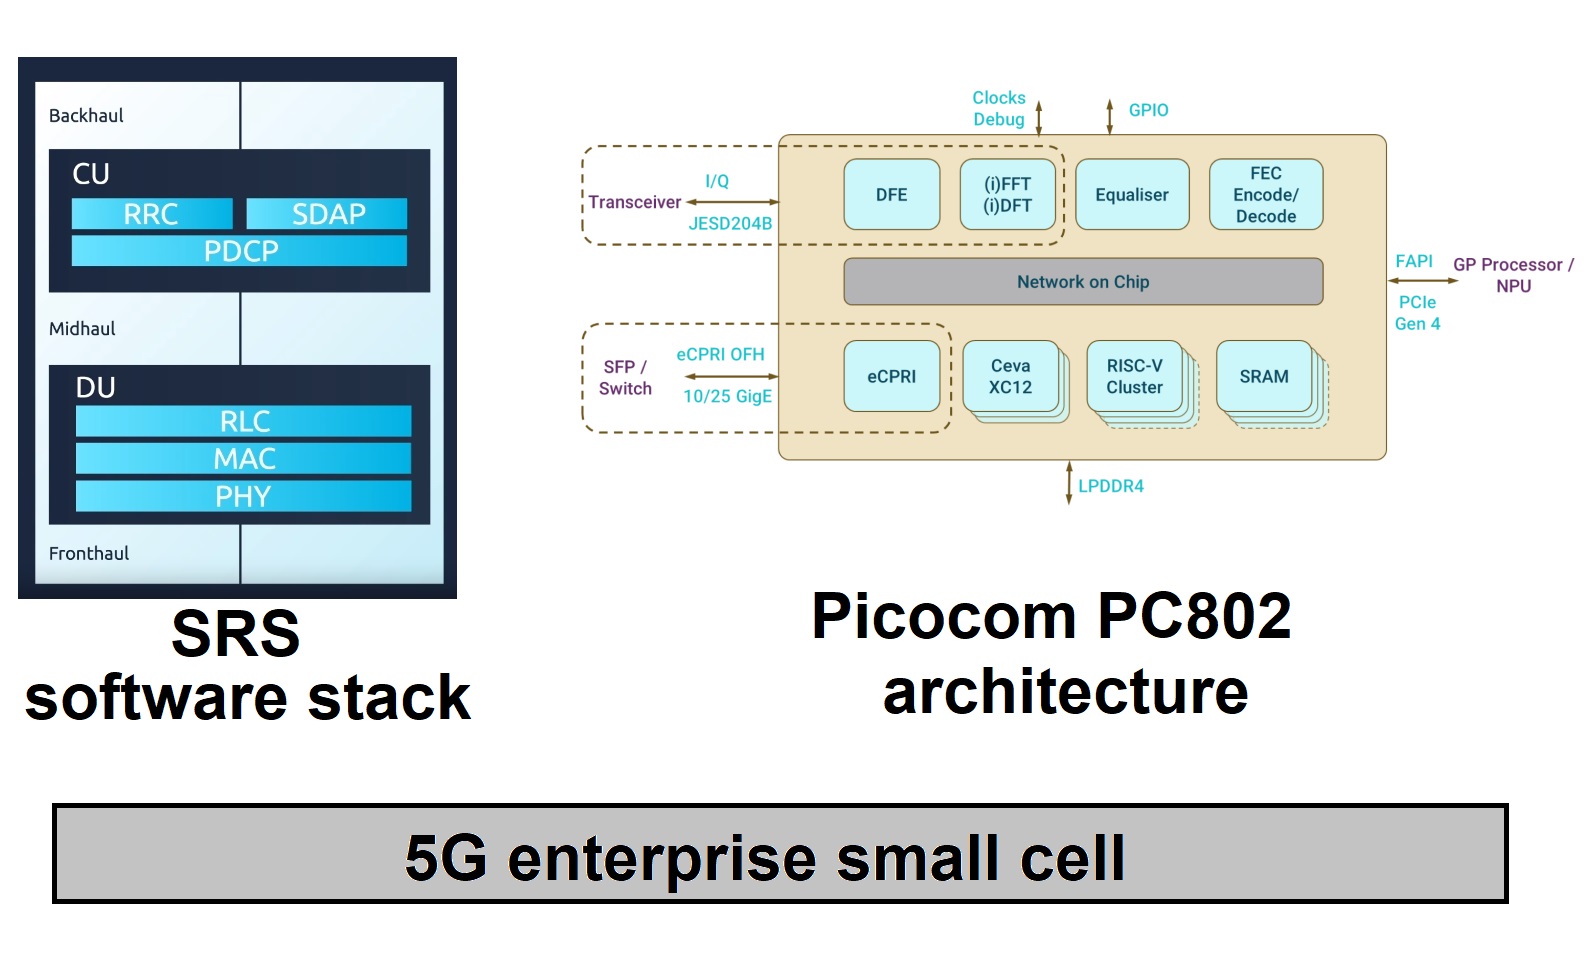 5G software stack runs on small cell PHY SoC